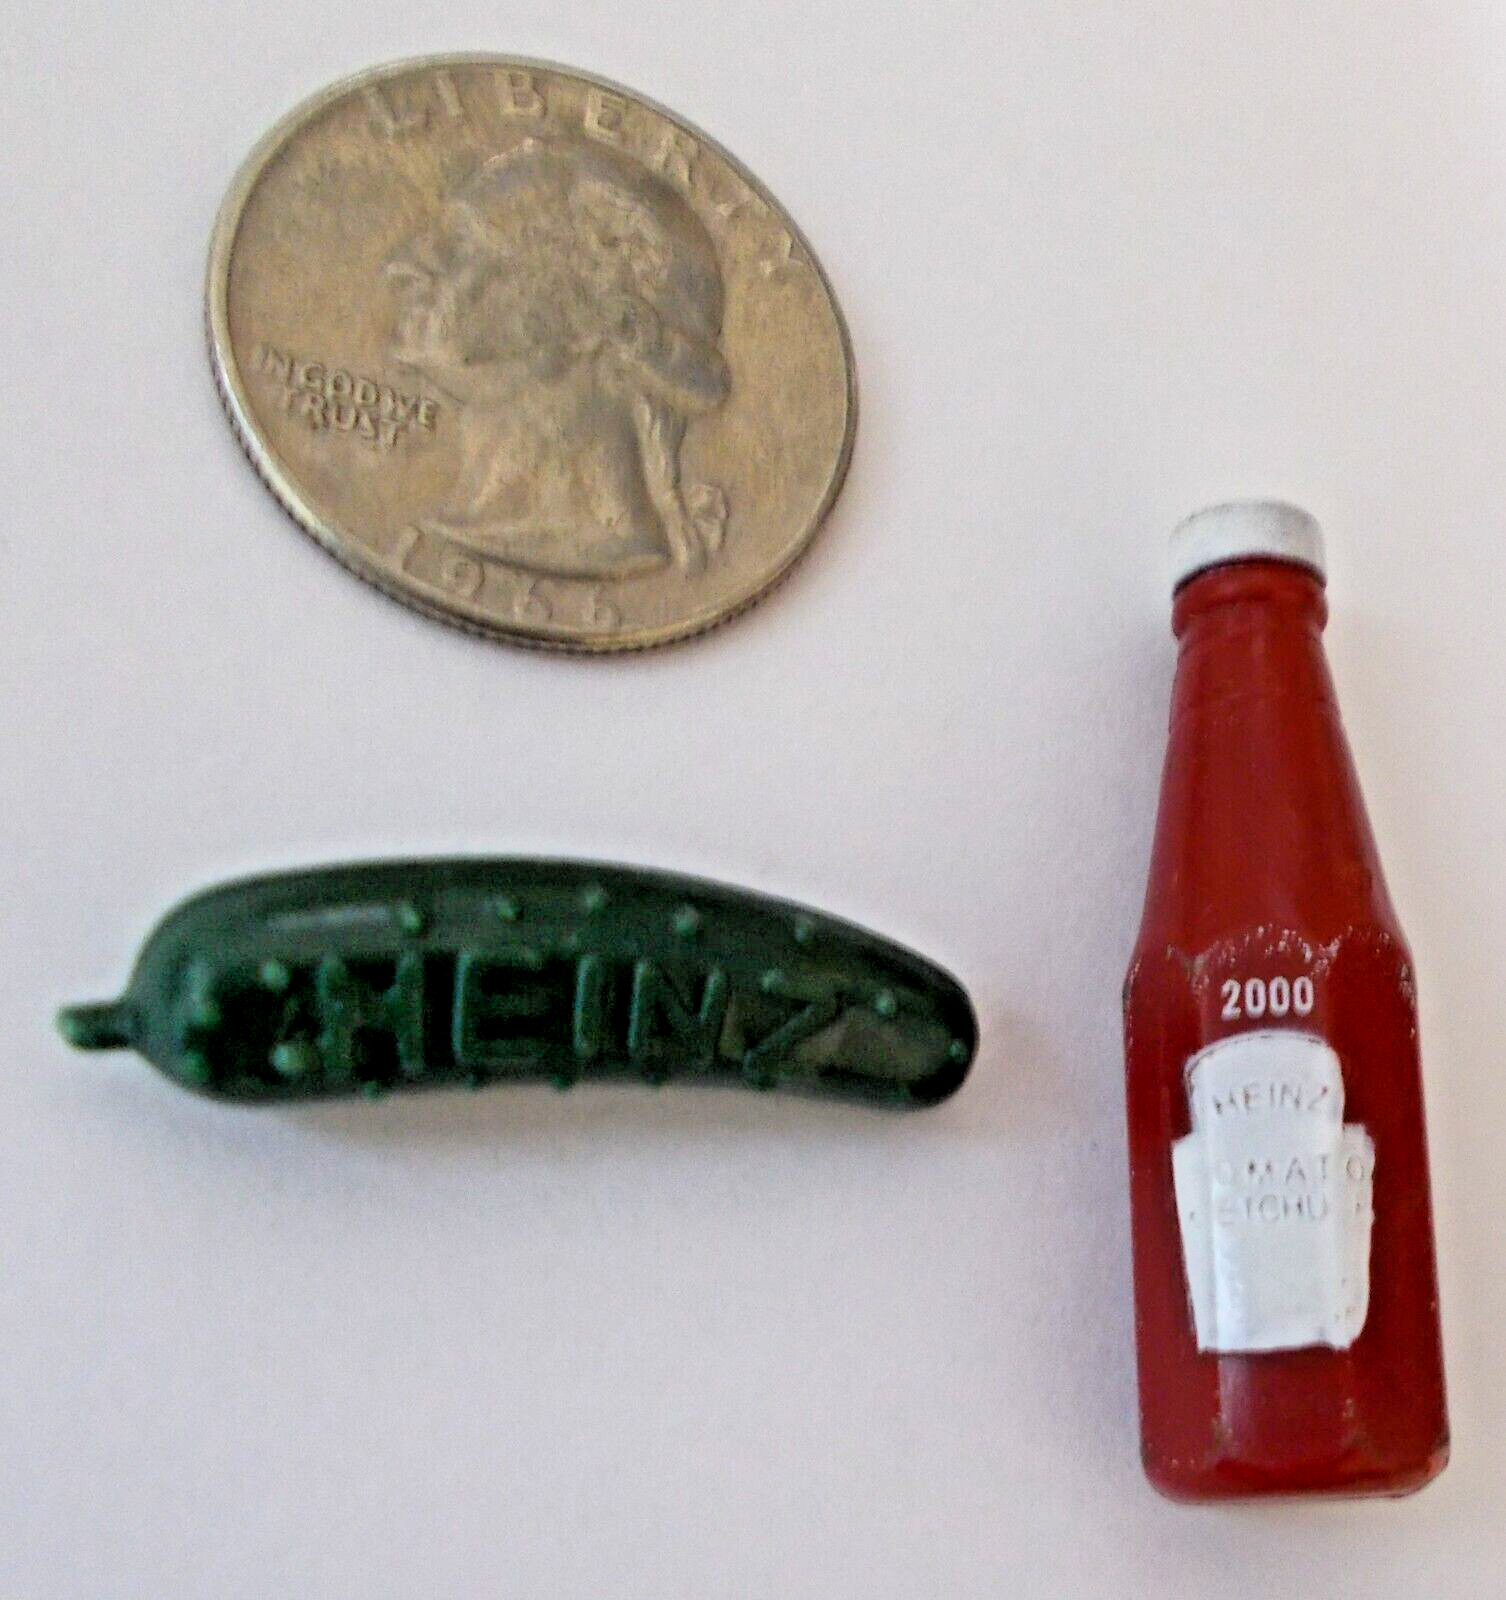 Heinz Small Pickle and Ketchup Lapel Pins - Vintage circa 2000